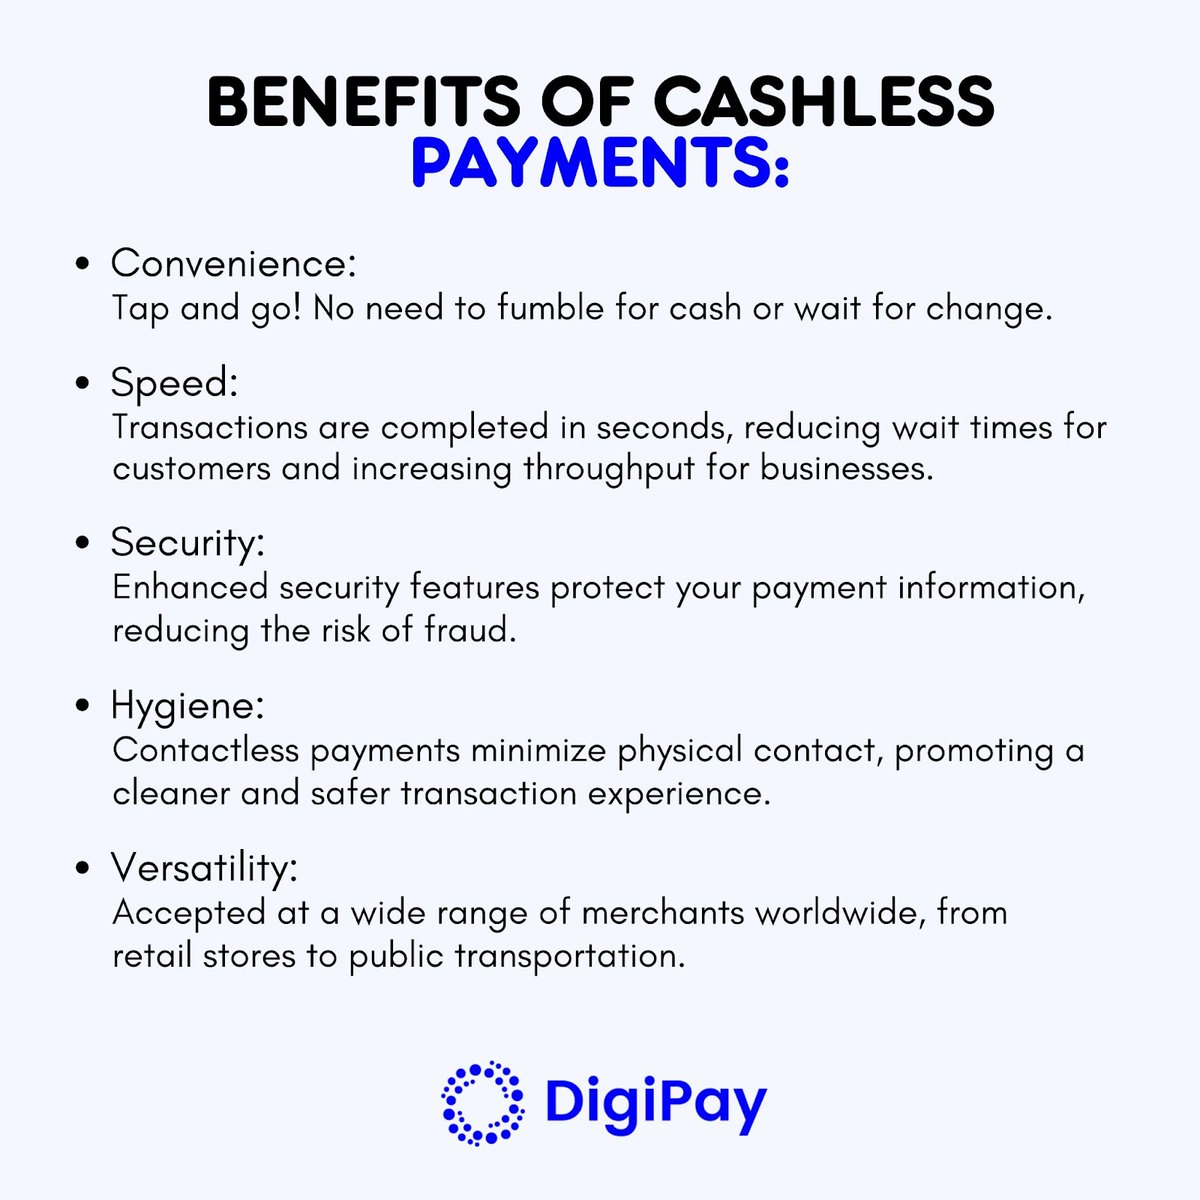 'Tap into convenience, speed, and security with contactless payments! 💳 Embrace the future of transactions for a cleaner, safer, and more efficient payment experience.
-----
digipayusa.com or contact us at! 561-342-5990 
.

#ContactlessPayments #FutureOfPayments